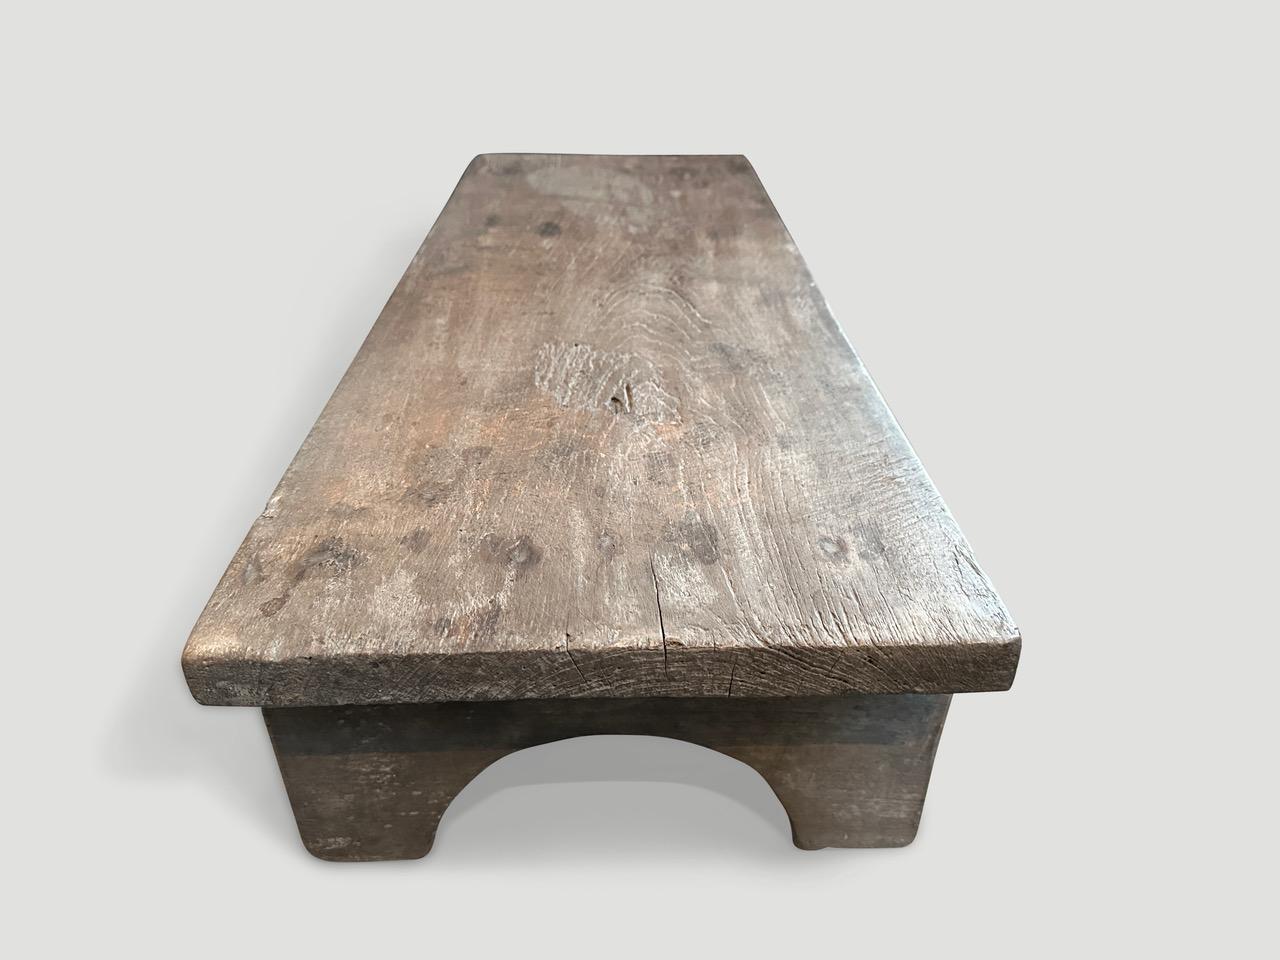 Andrianna Shamaris Antique Low Teak Wood Coffee Table In Excellent Condition For Sale In New York, NY